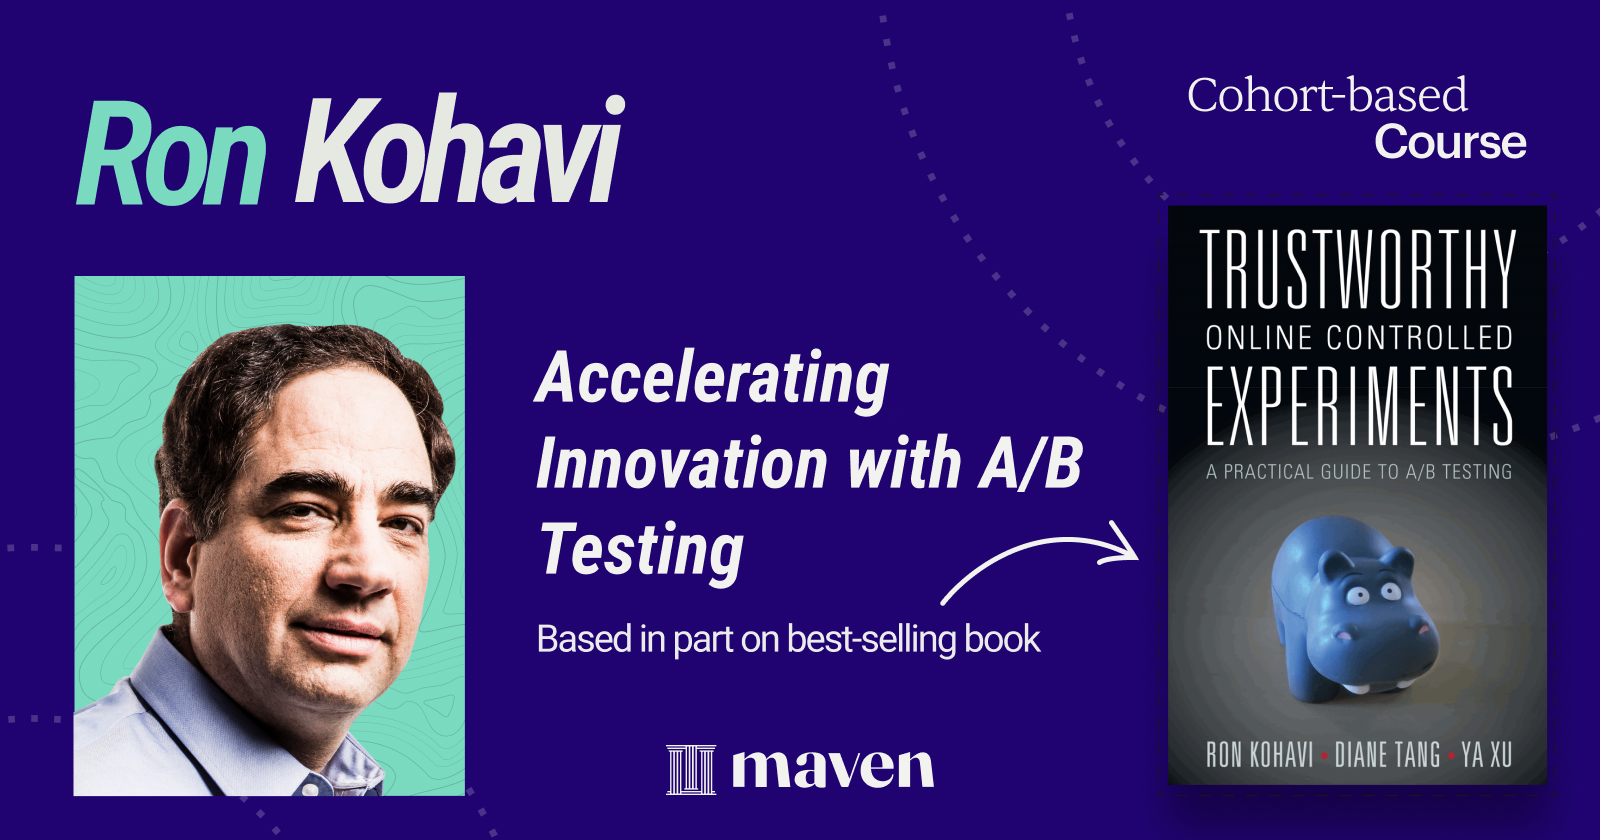 Accelerating innovation with A/B Testing